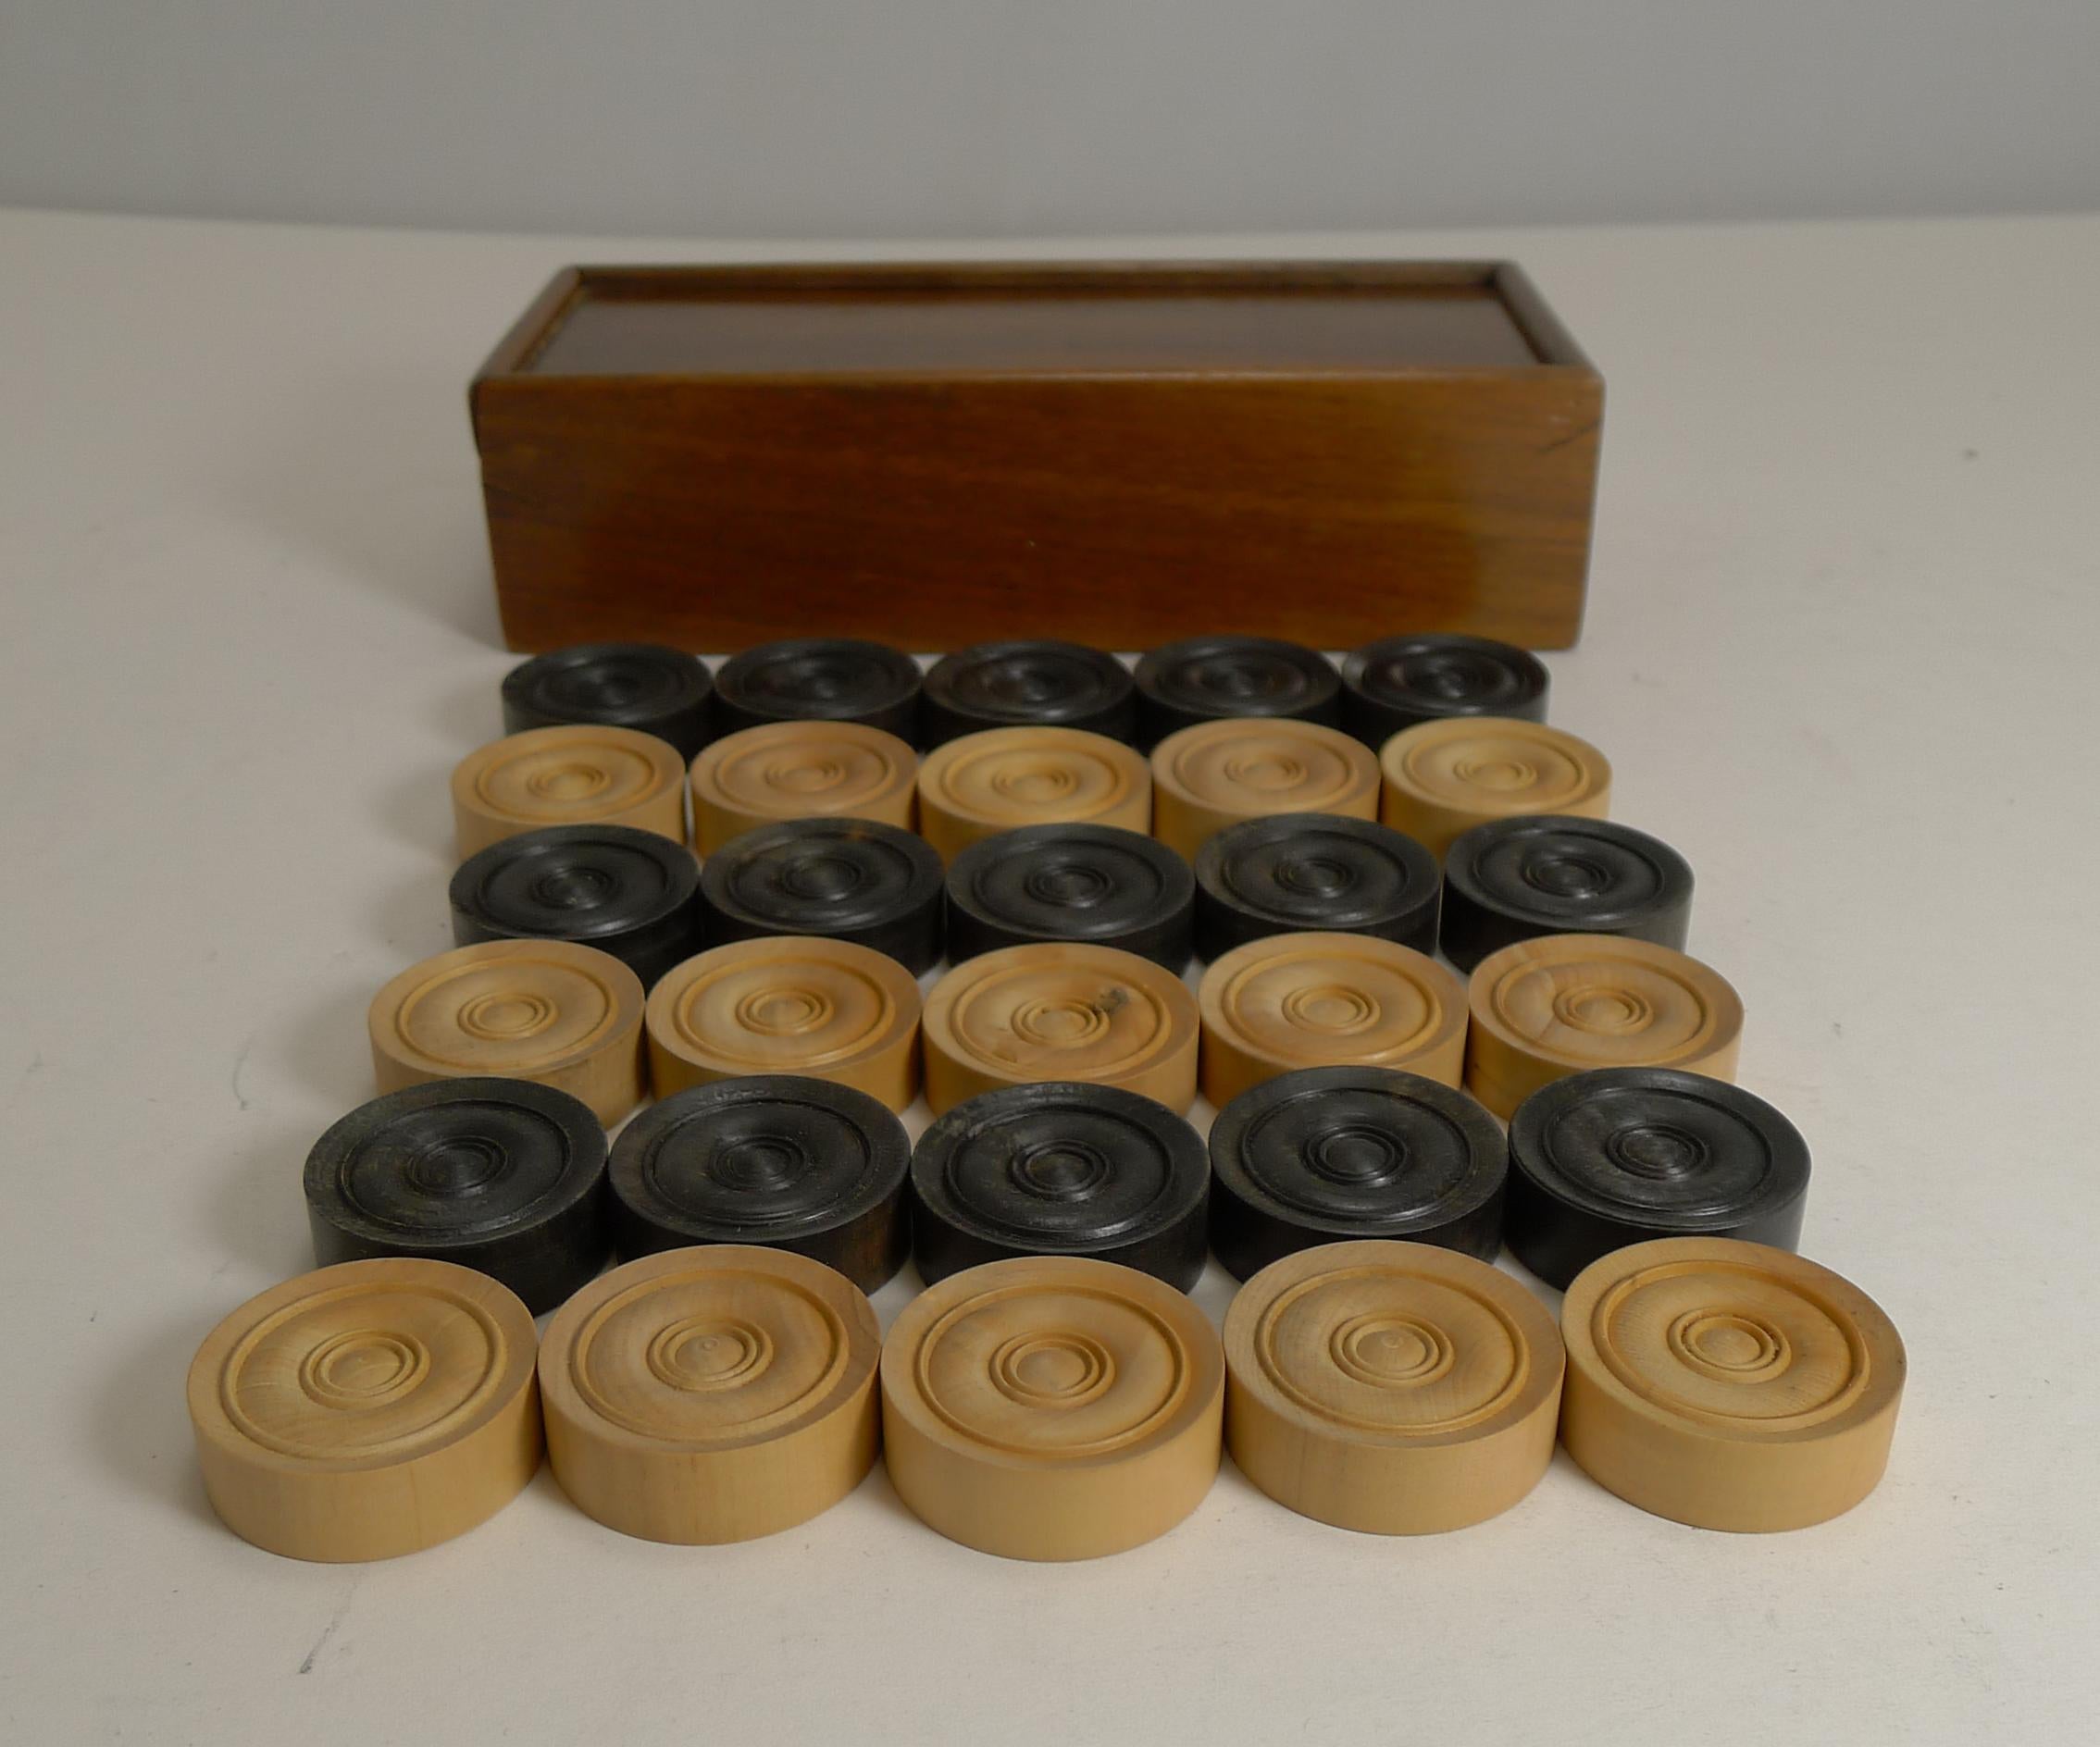 Wood Antique English Set Ebony and Boxwood Draughts / Checkers / Backgammon Counters